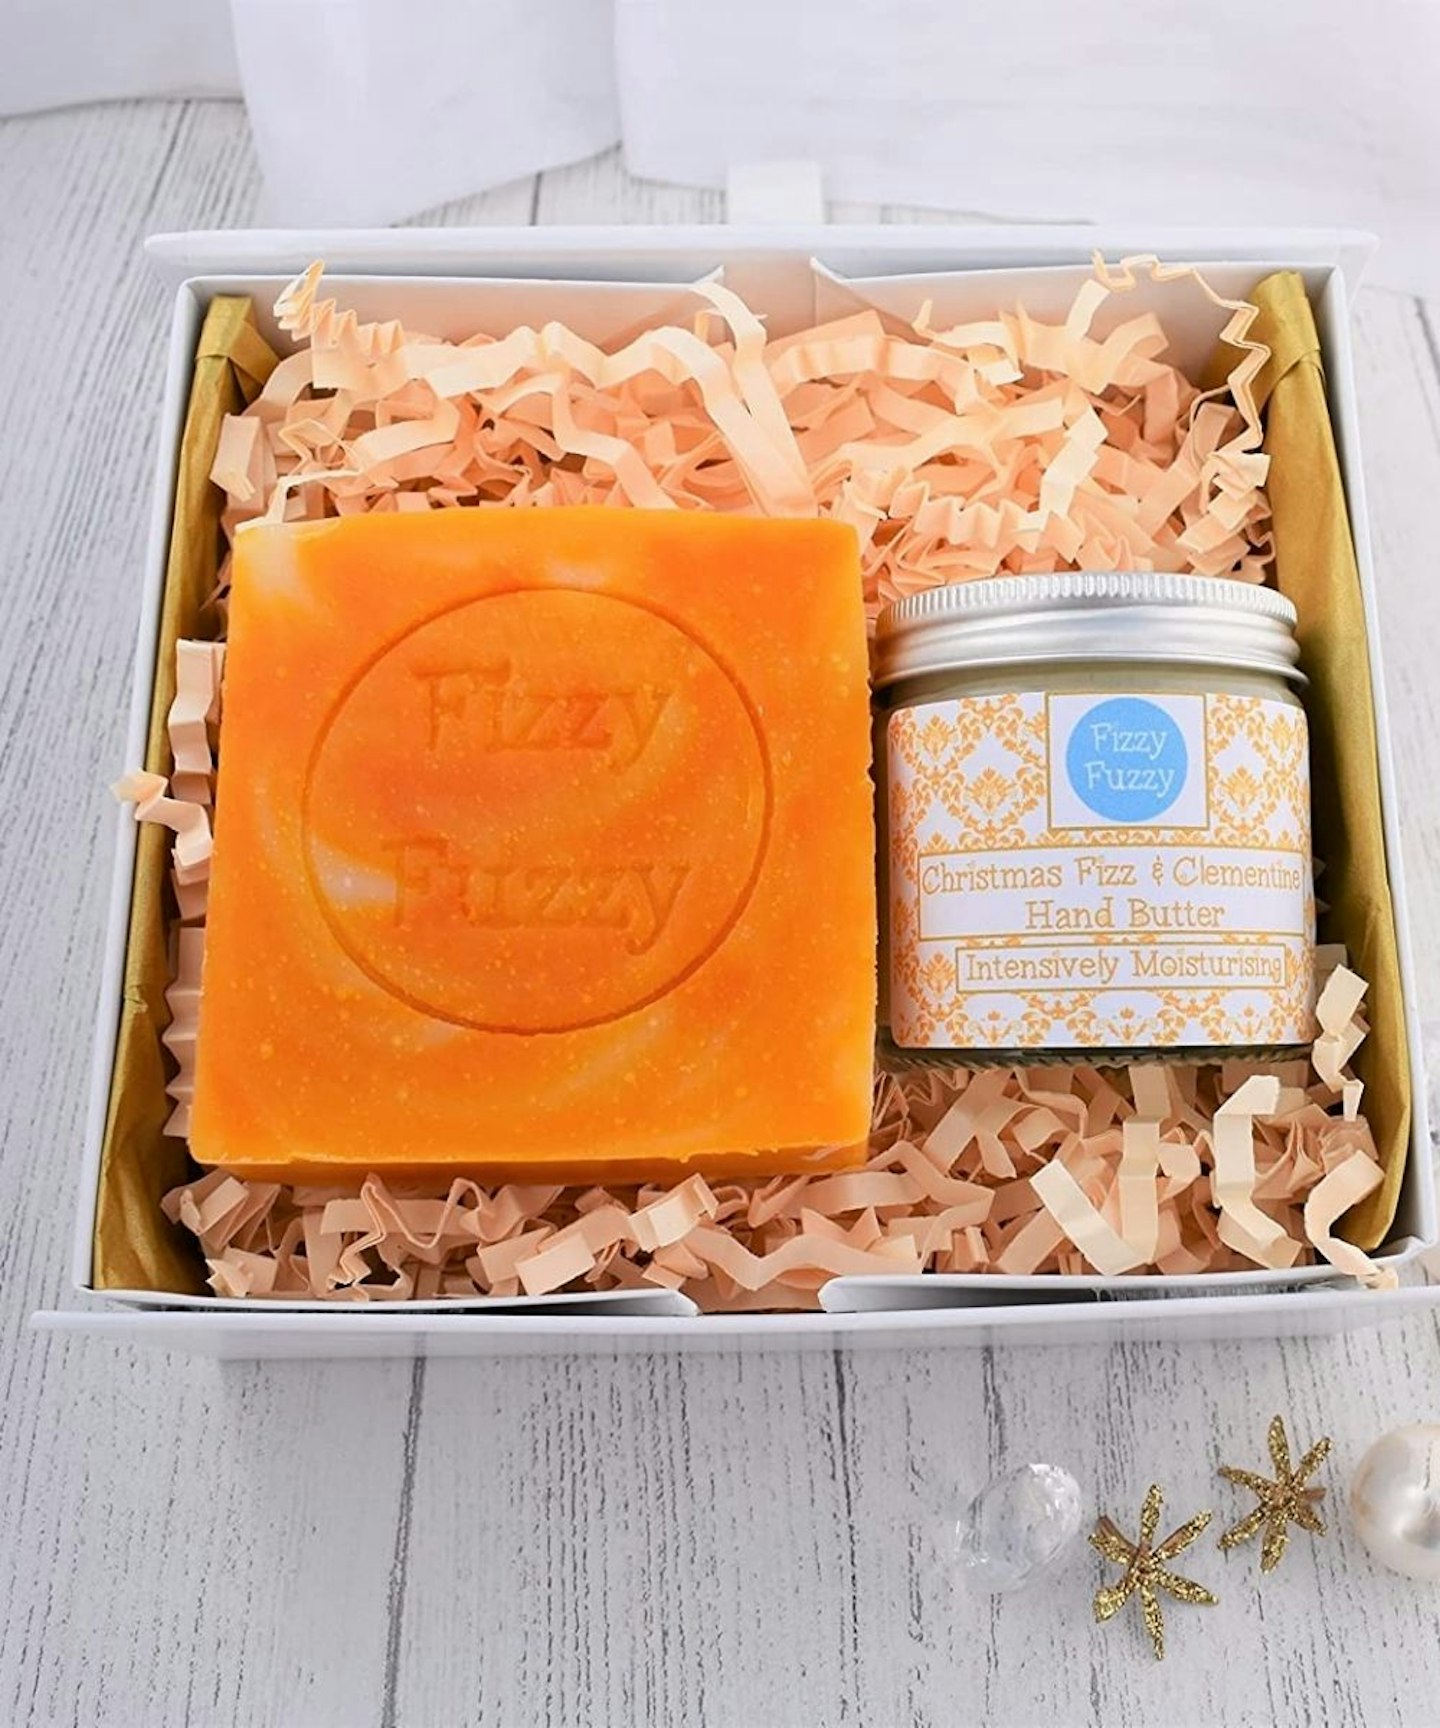 Christmas Fizz & Clementine Gift Set